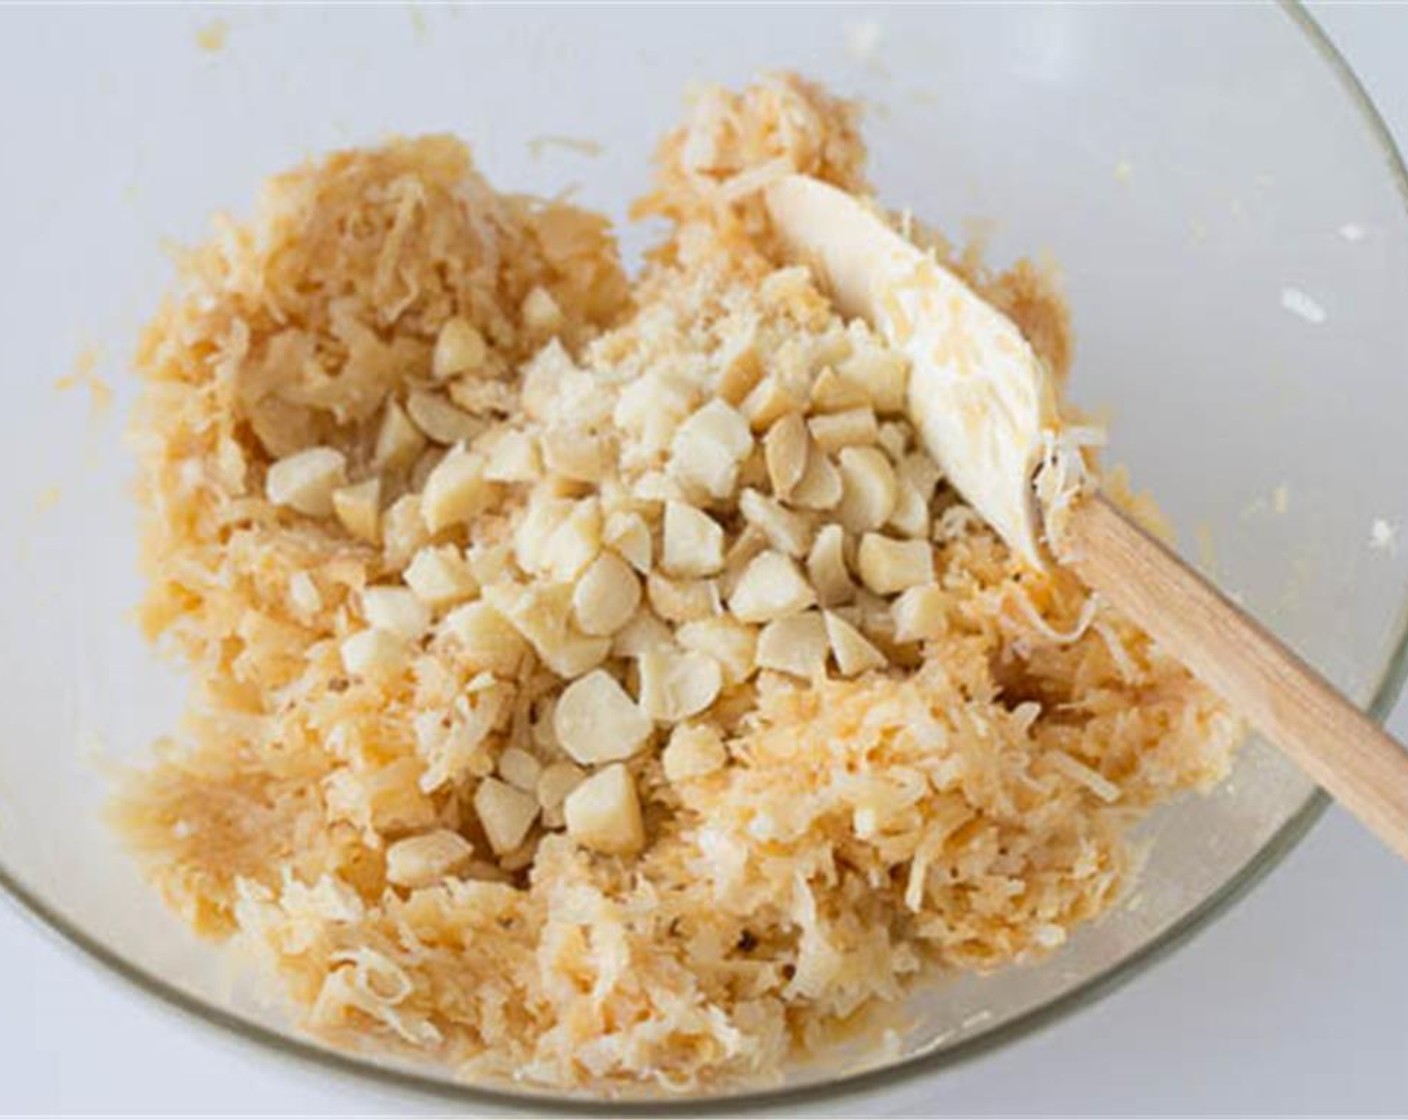 step 3 Coarsely chop Macadamia Nuts (1/3 cup) and mix them in with the coconut mixture.